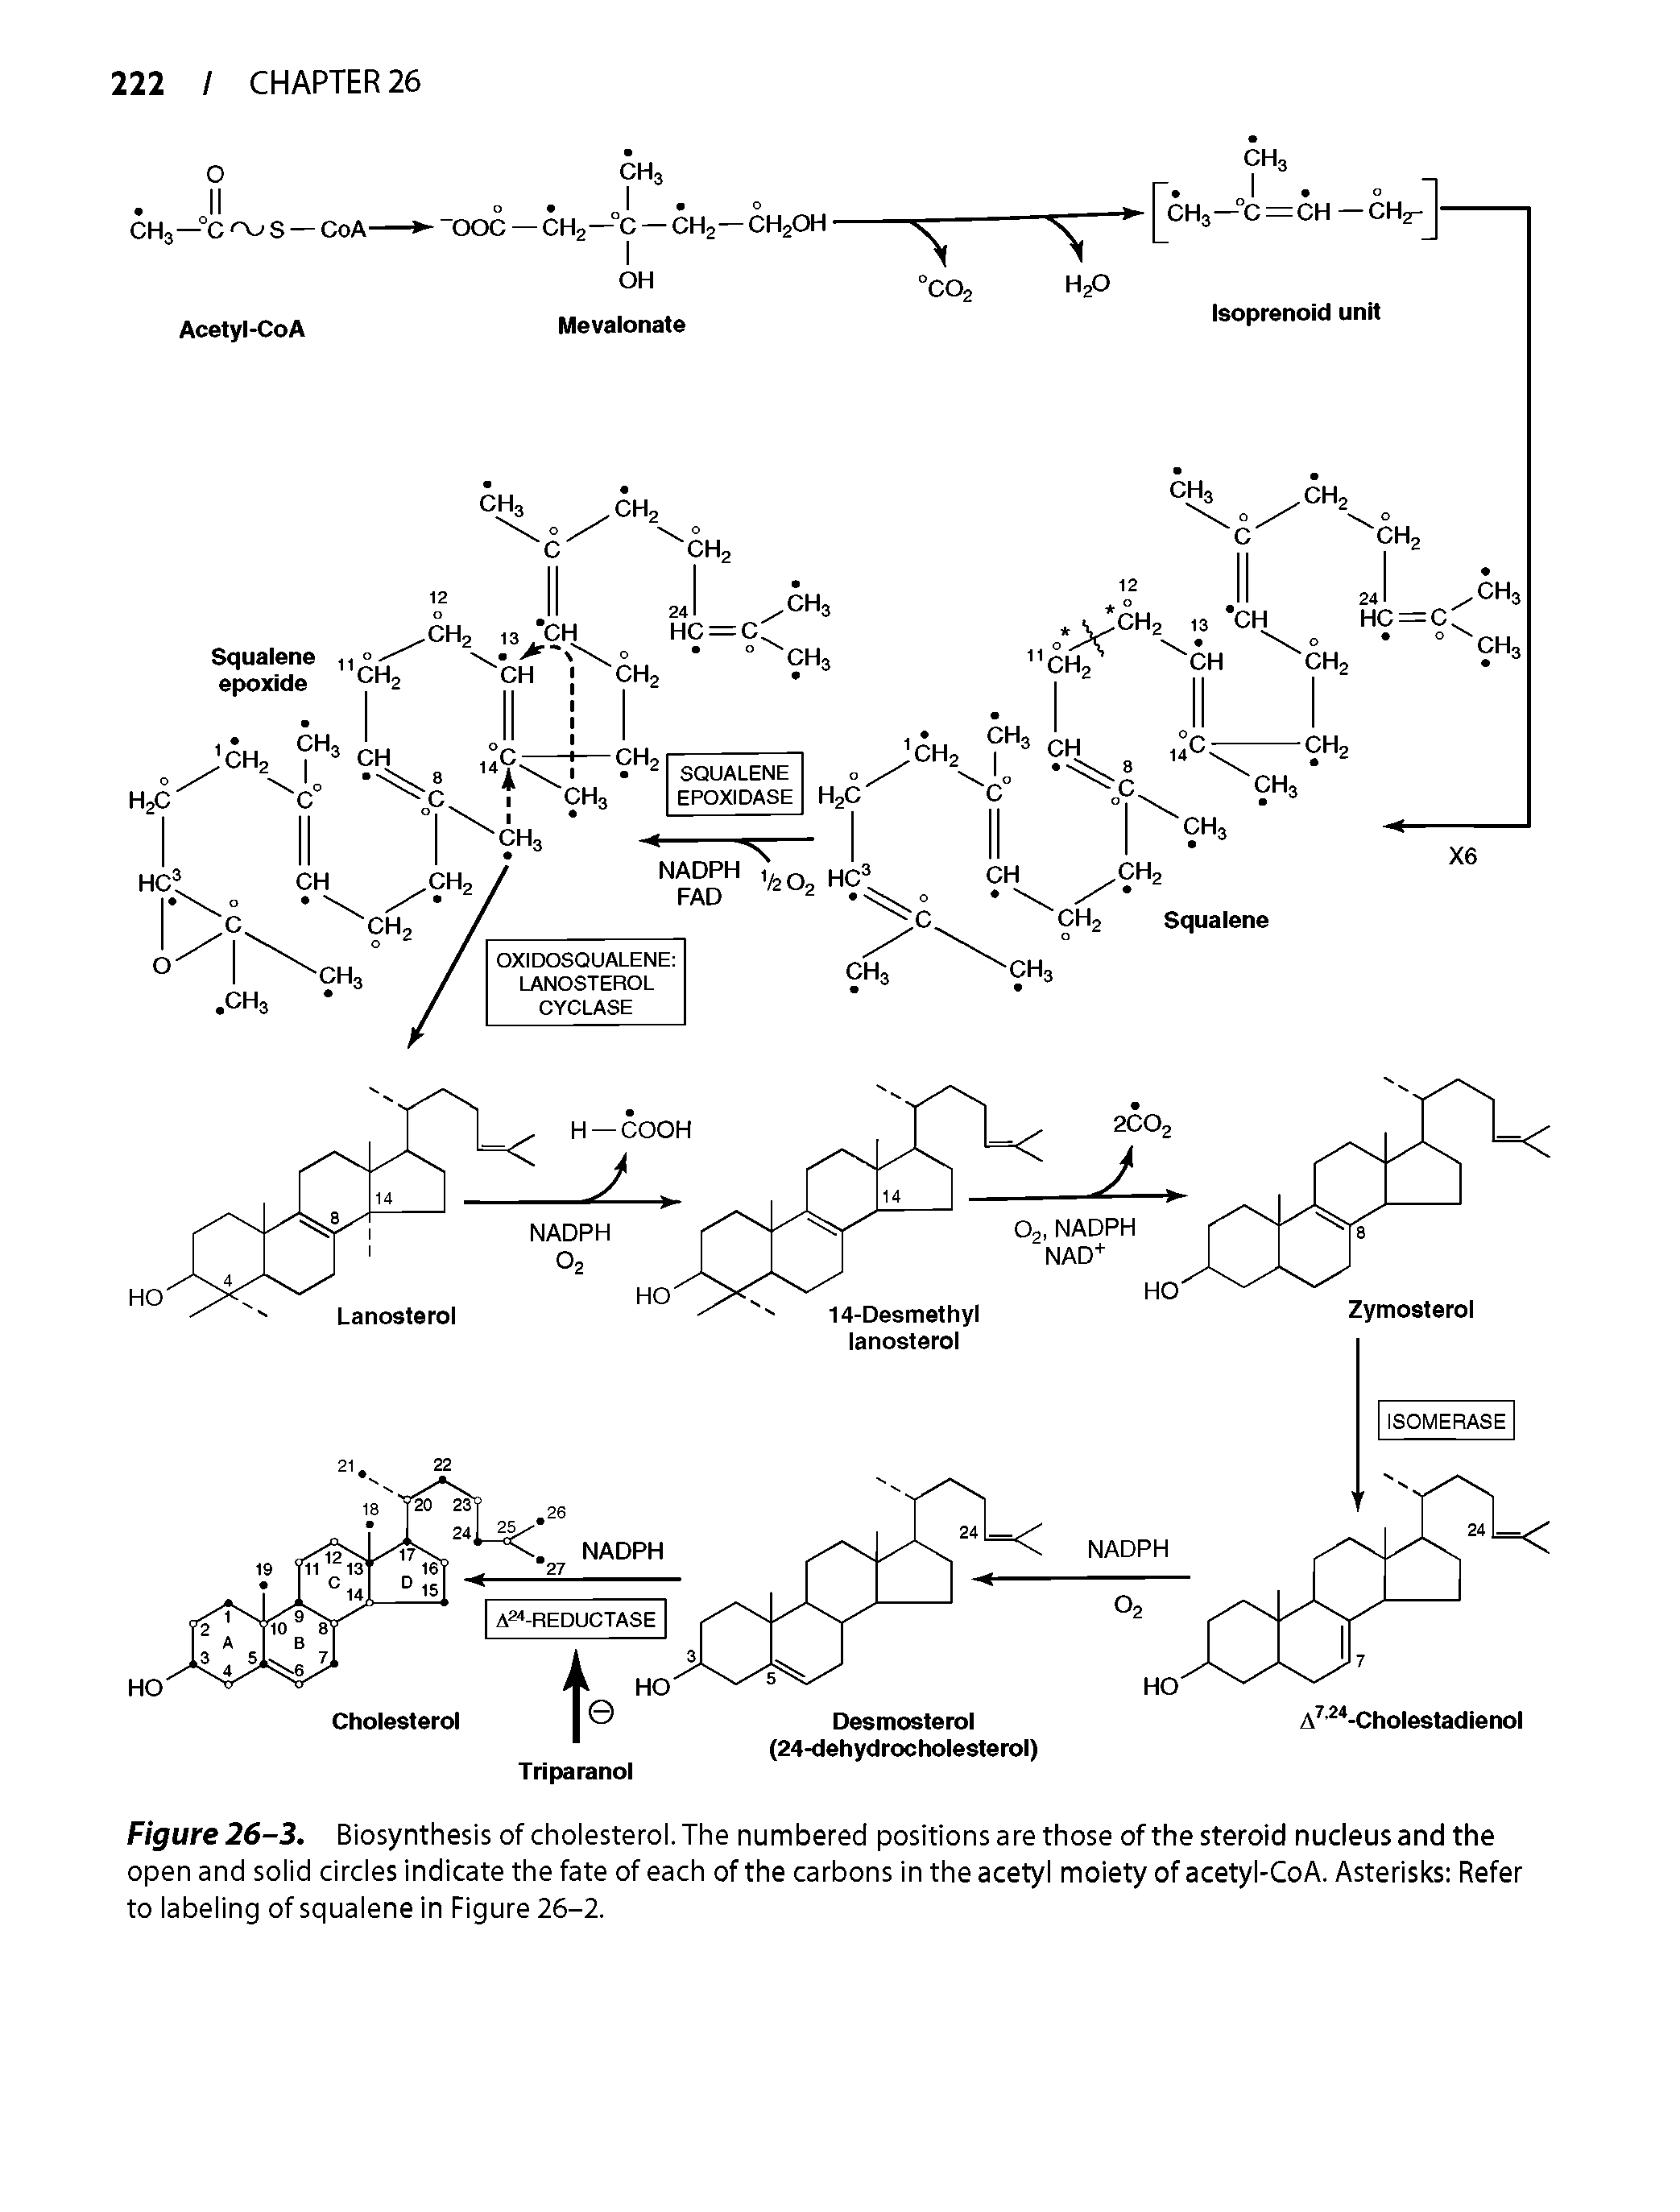 Figure 26-3. Biosynthesis of cholesterol. The numbered positions are those of the steroid nucleus and the open and solid circles indicate the fate of each of the carbons in the acetyl moiety of acetyl-CoA. Asterisks Refer to labeling of squalene in Figure 26-2.